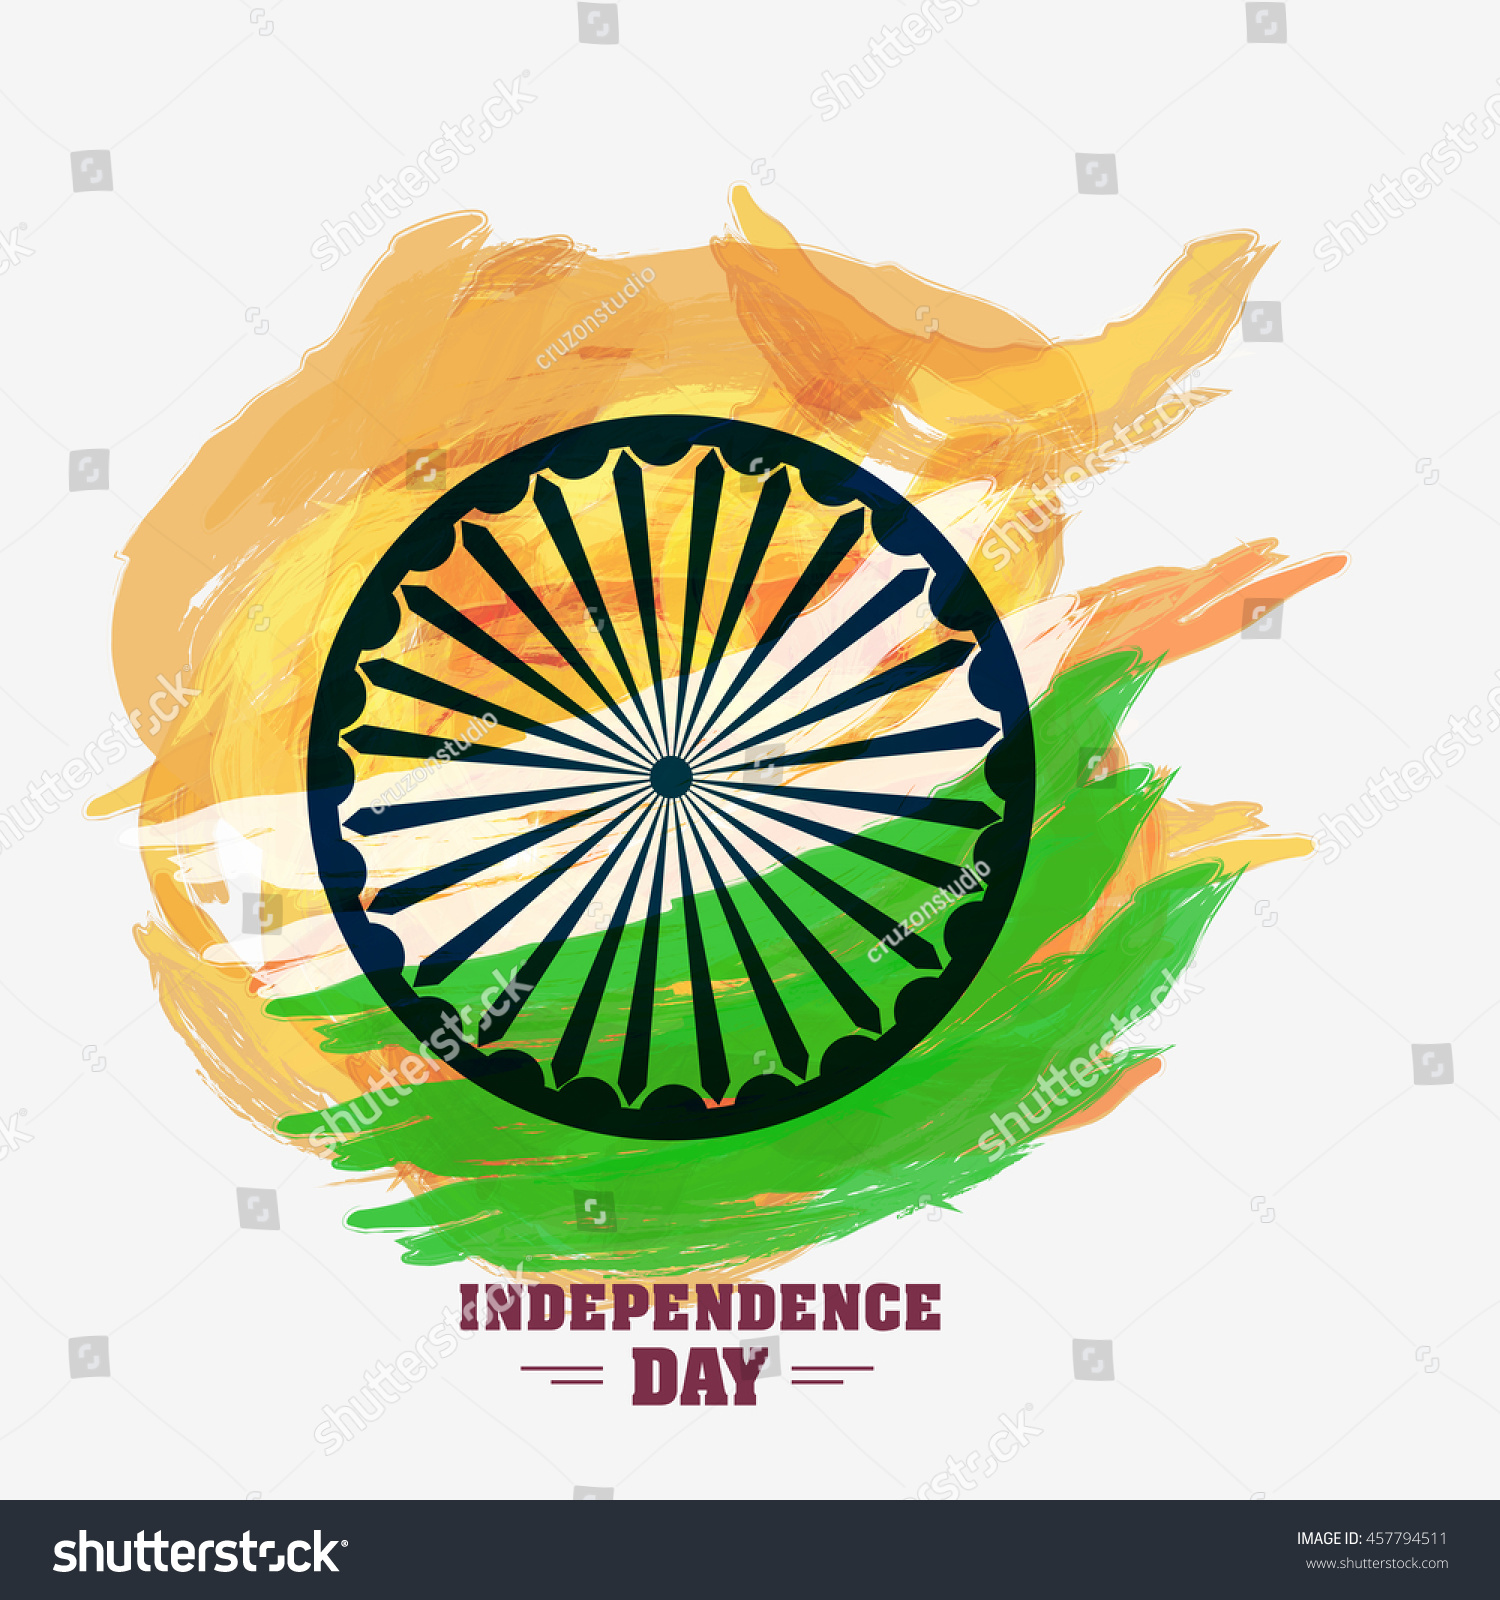 Happy Independence Day India Vector Royalty Free Stock Vector